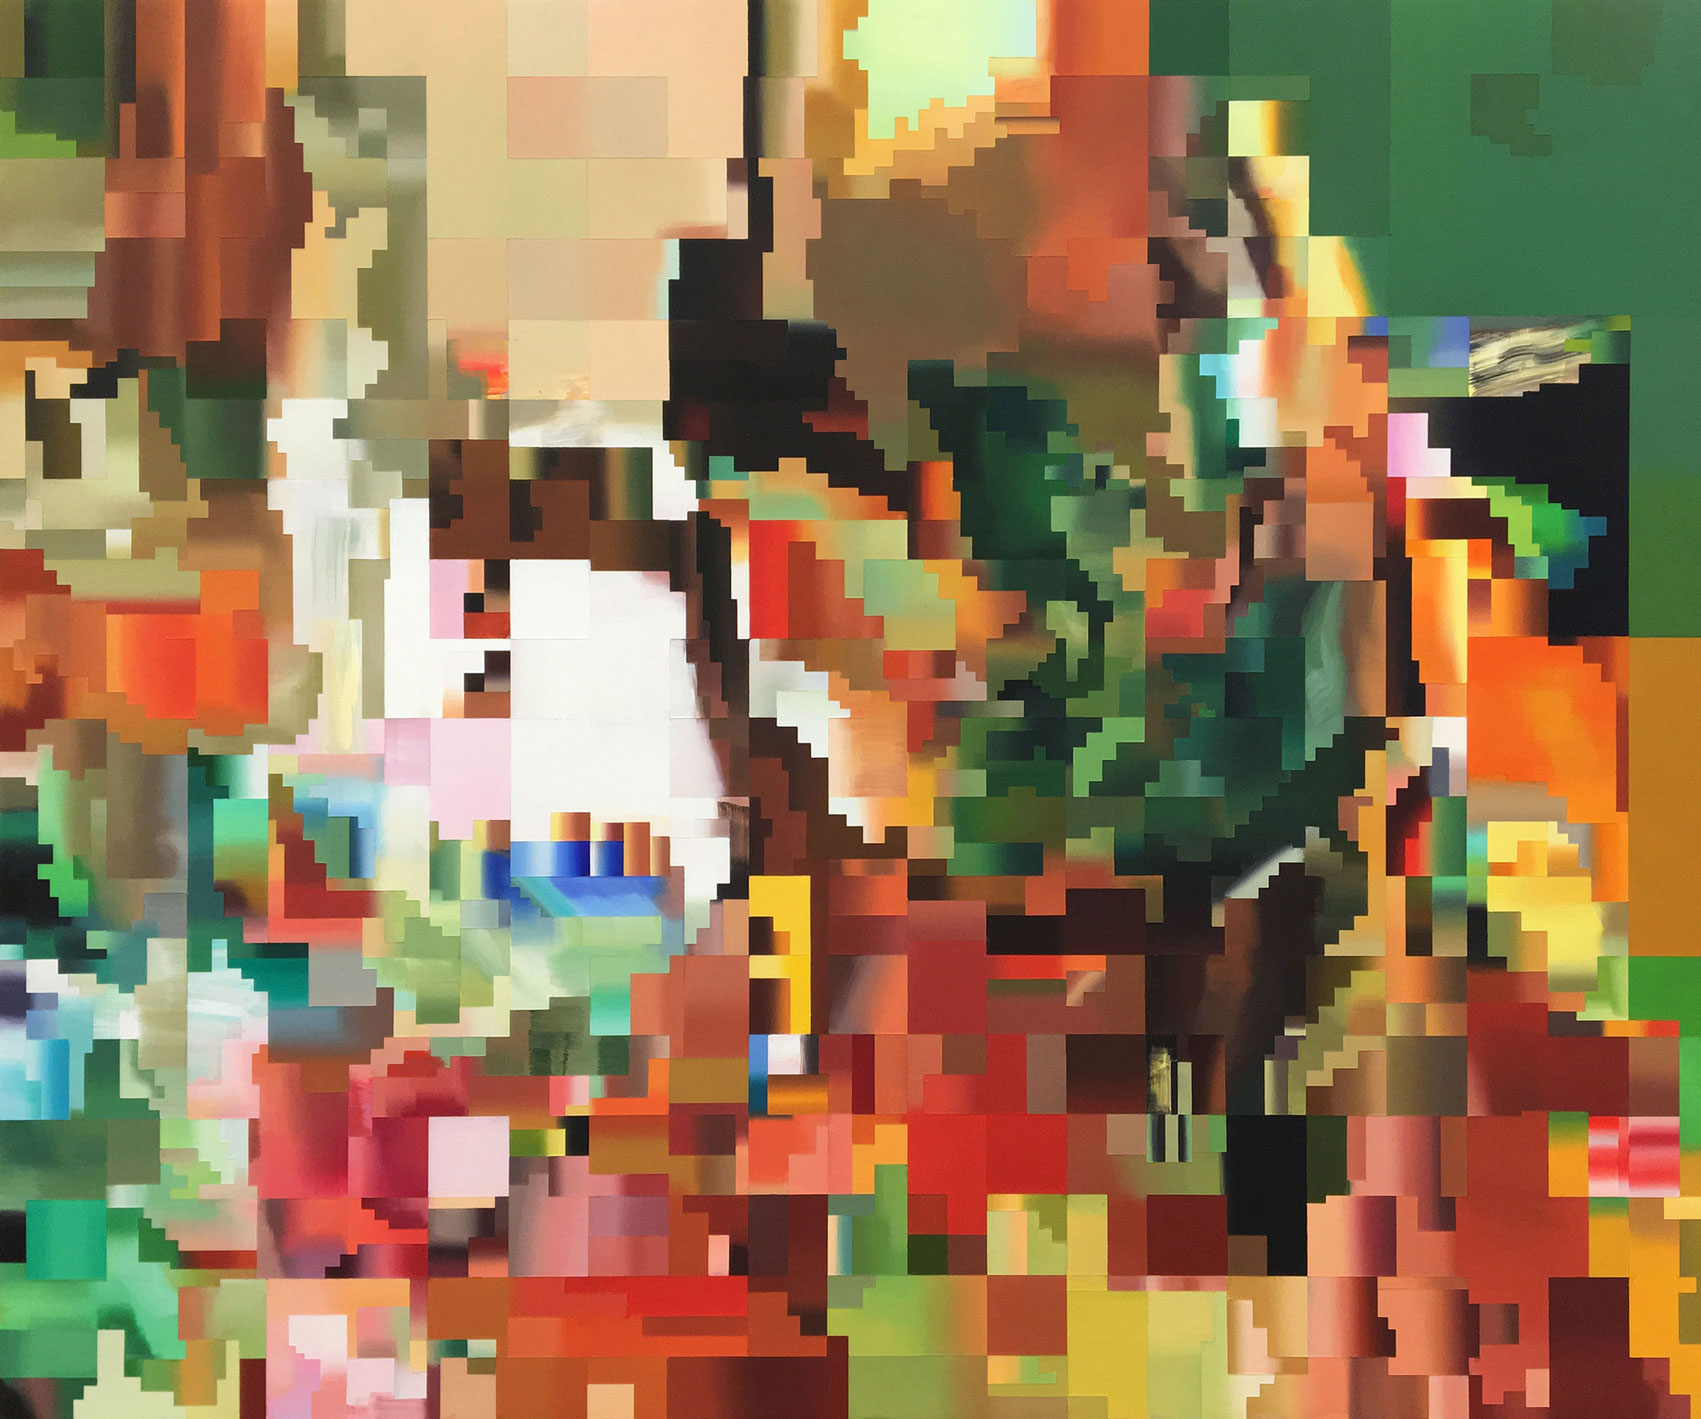 Oil painting by artist and painter Paul Lemmon in bright colours of green, red and gold depicting a pixelated frame from a glitched digital video